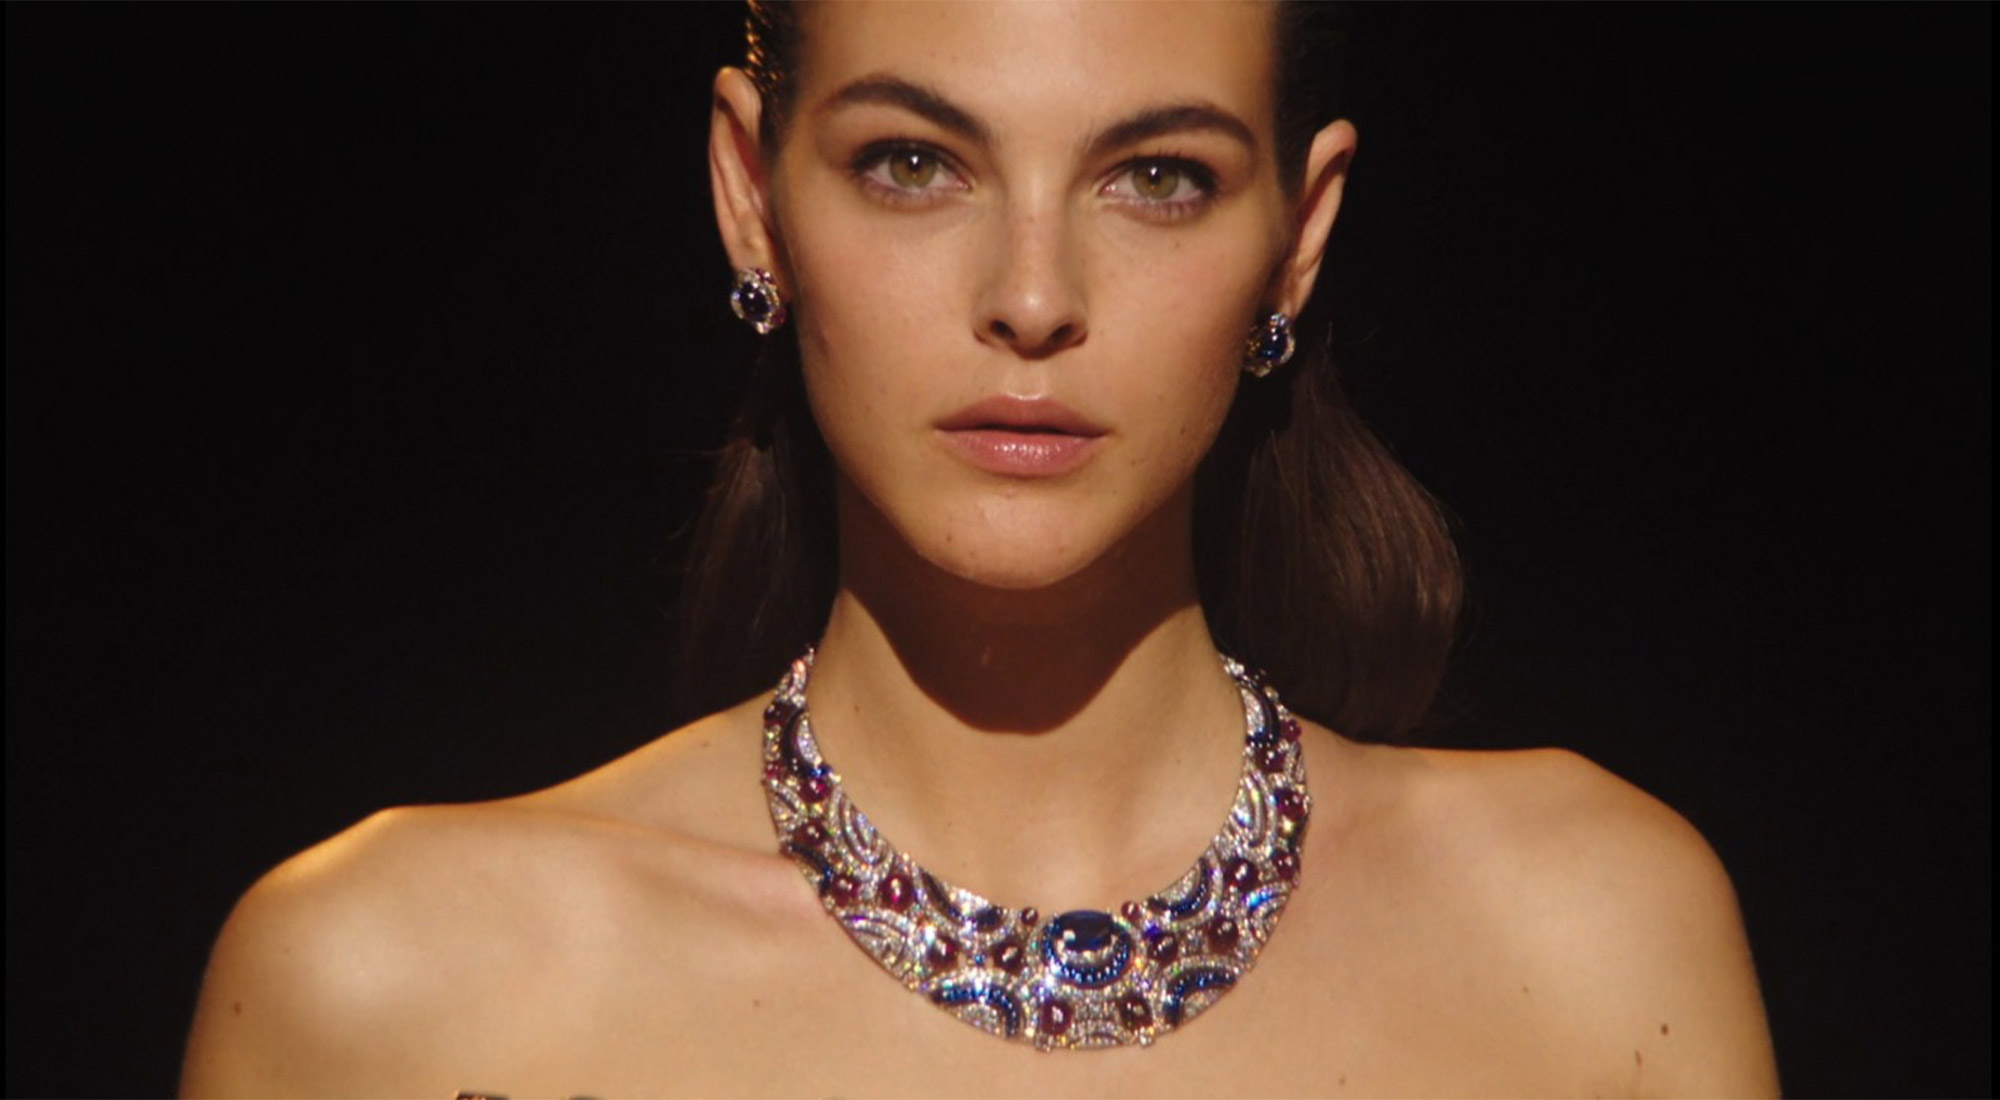 The Magnifica High Jewelry collection